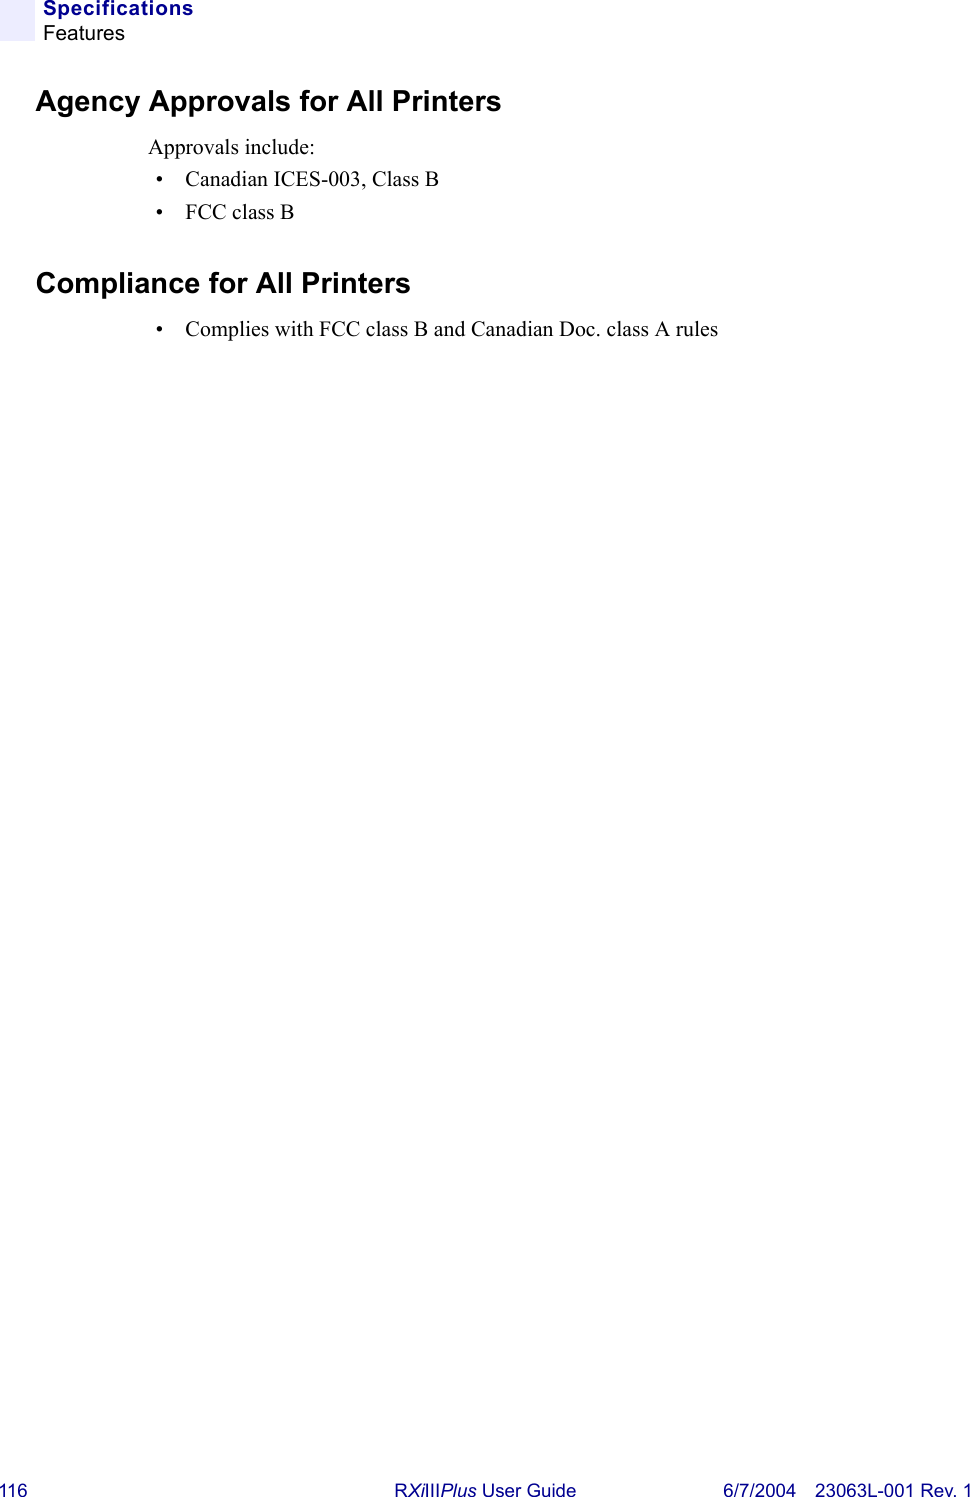 116 RXiIIIPlus User Guide 6/7/2004 23063L-001 Rev. 1SpecificationsFeaturesAgency Approvals for All PrintersApprovals include:• Canadian ICES-003, Class B• FCC class BCompliance for All Printers• Complies with FCC class B and Canadian Doc. class A rules